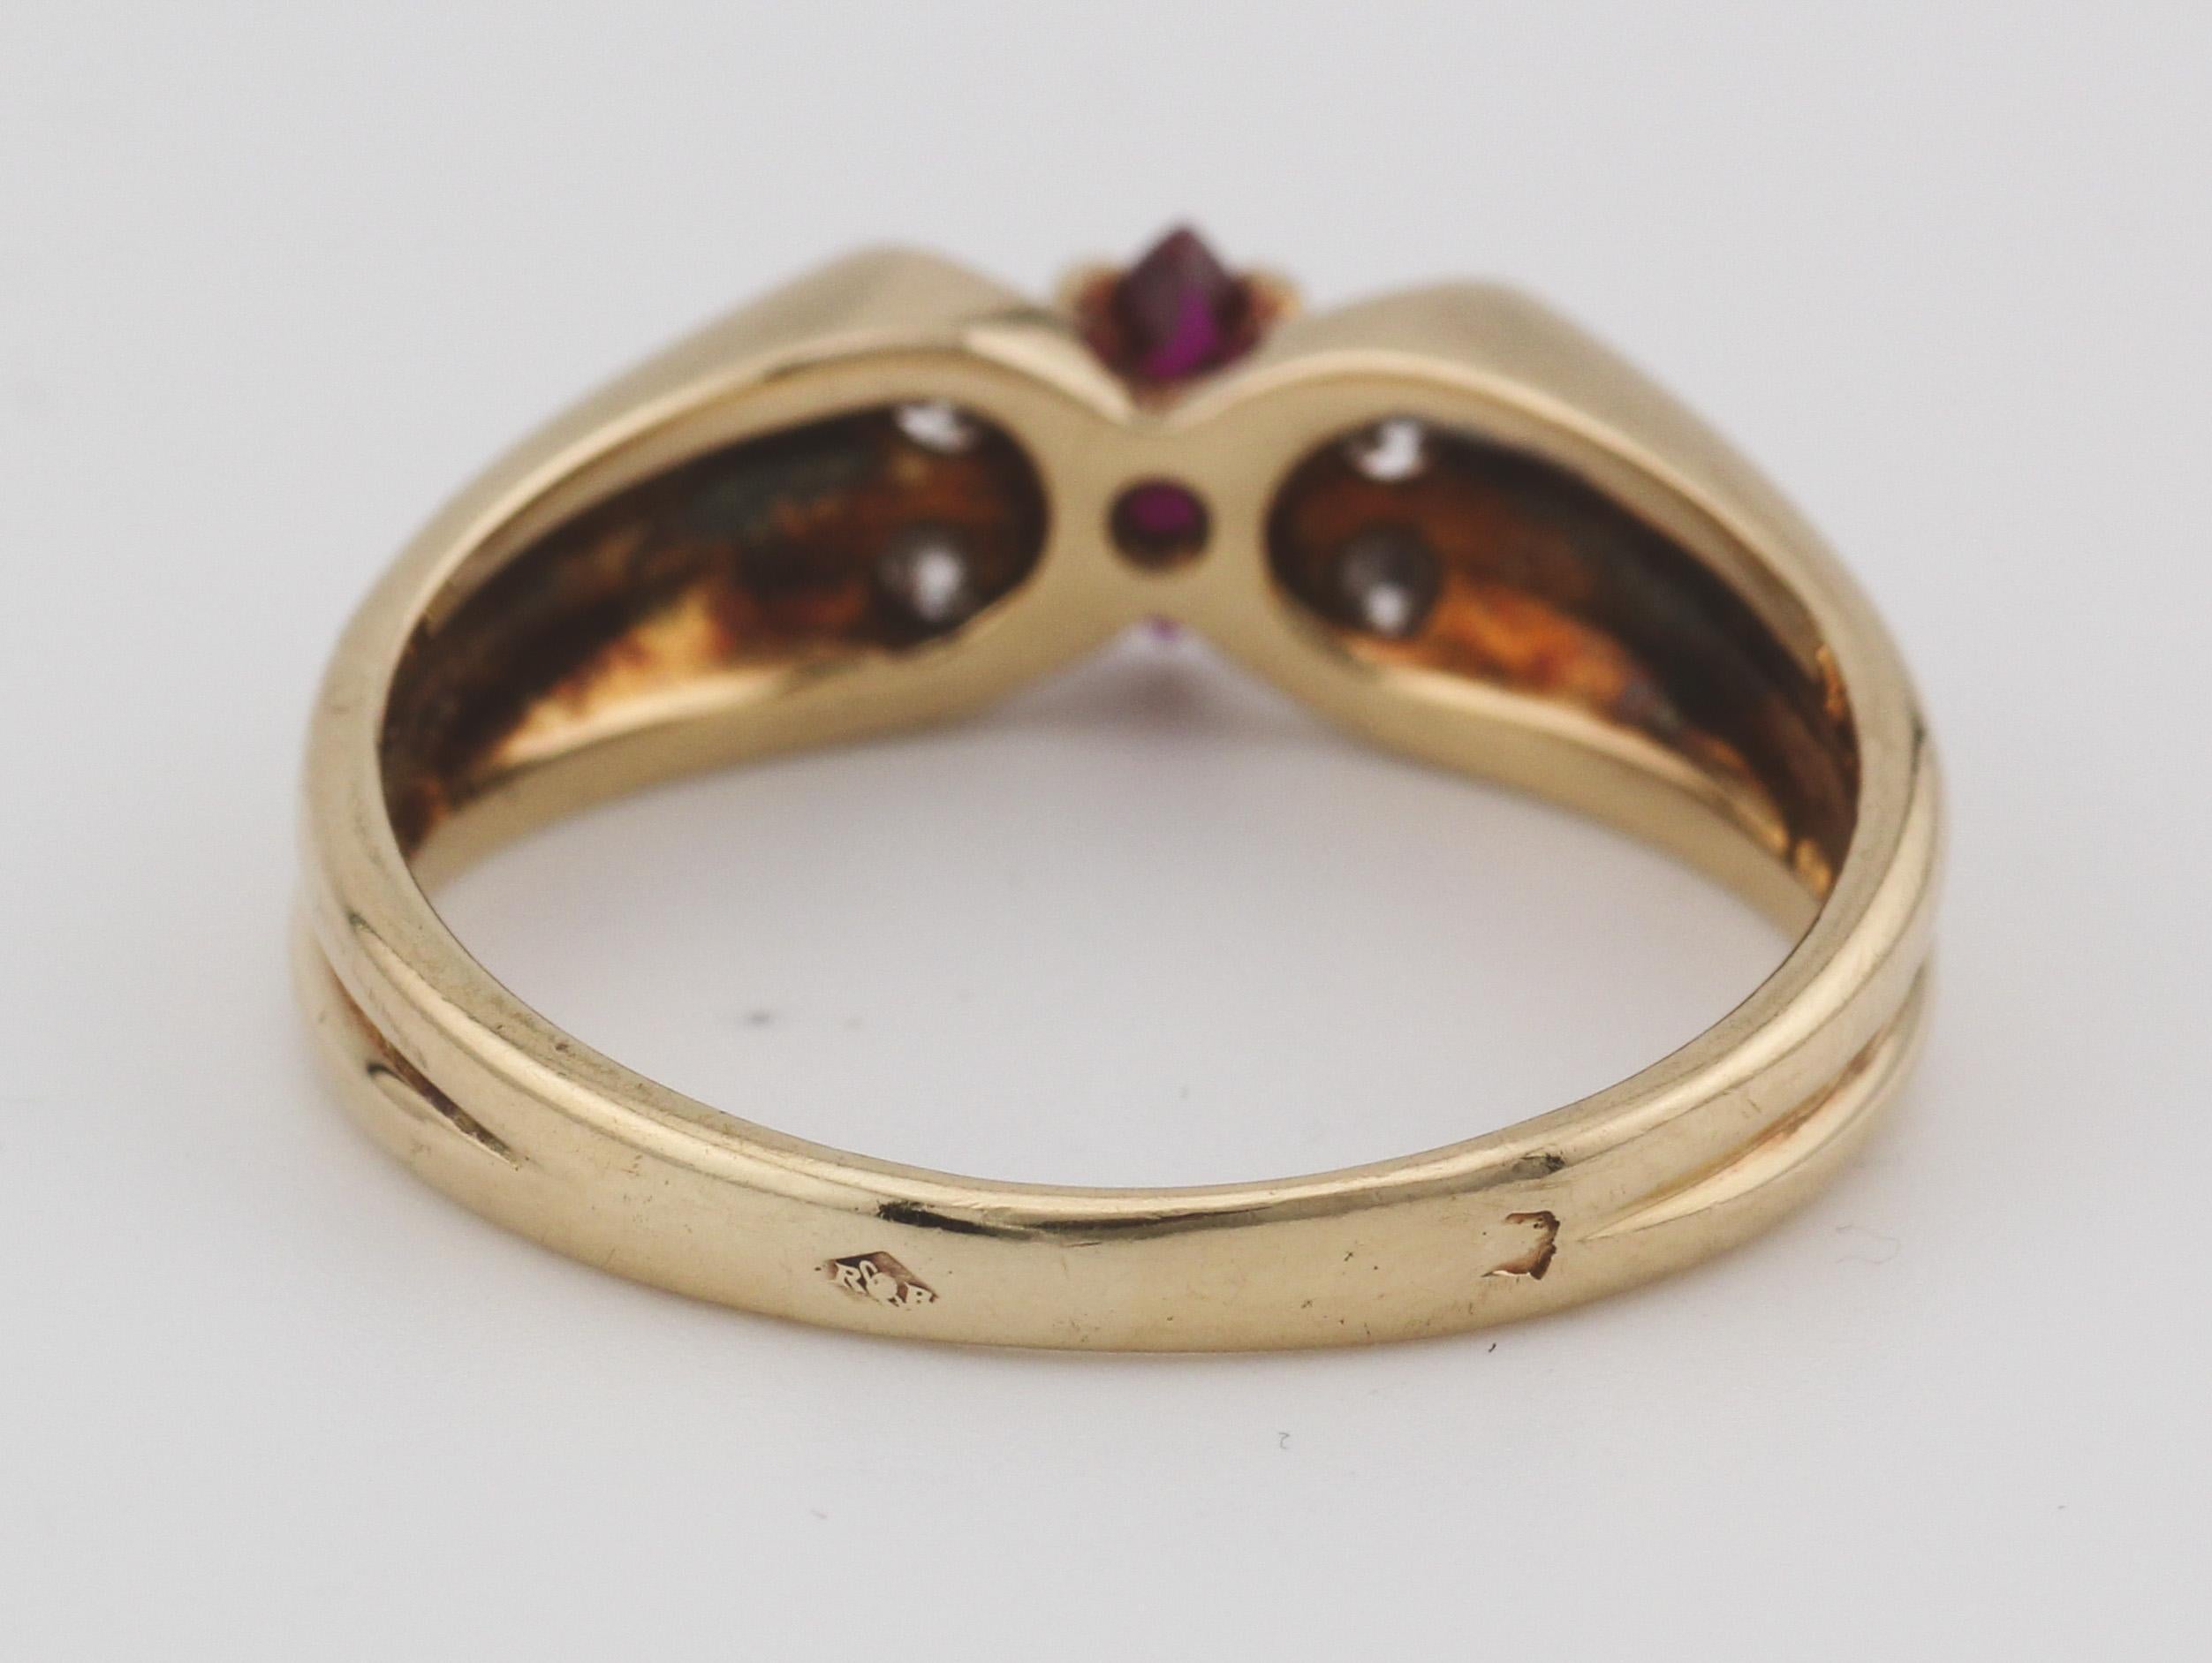 Van Cleef & Arpels French Ruby Diamond 18K Yellow Gold Butterfly Ring Size 5 In Good Condition For Sale In Bellmore, NY